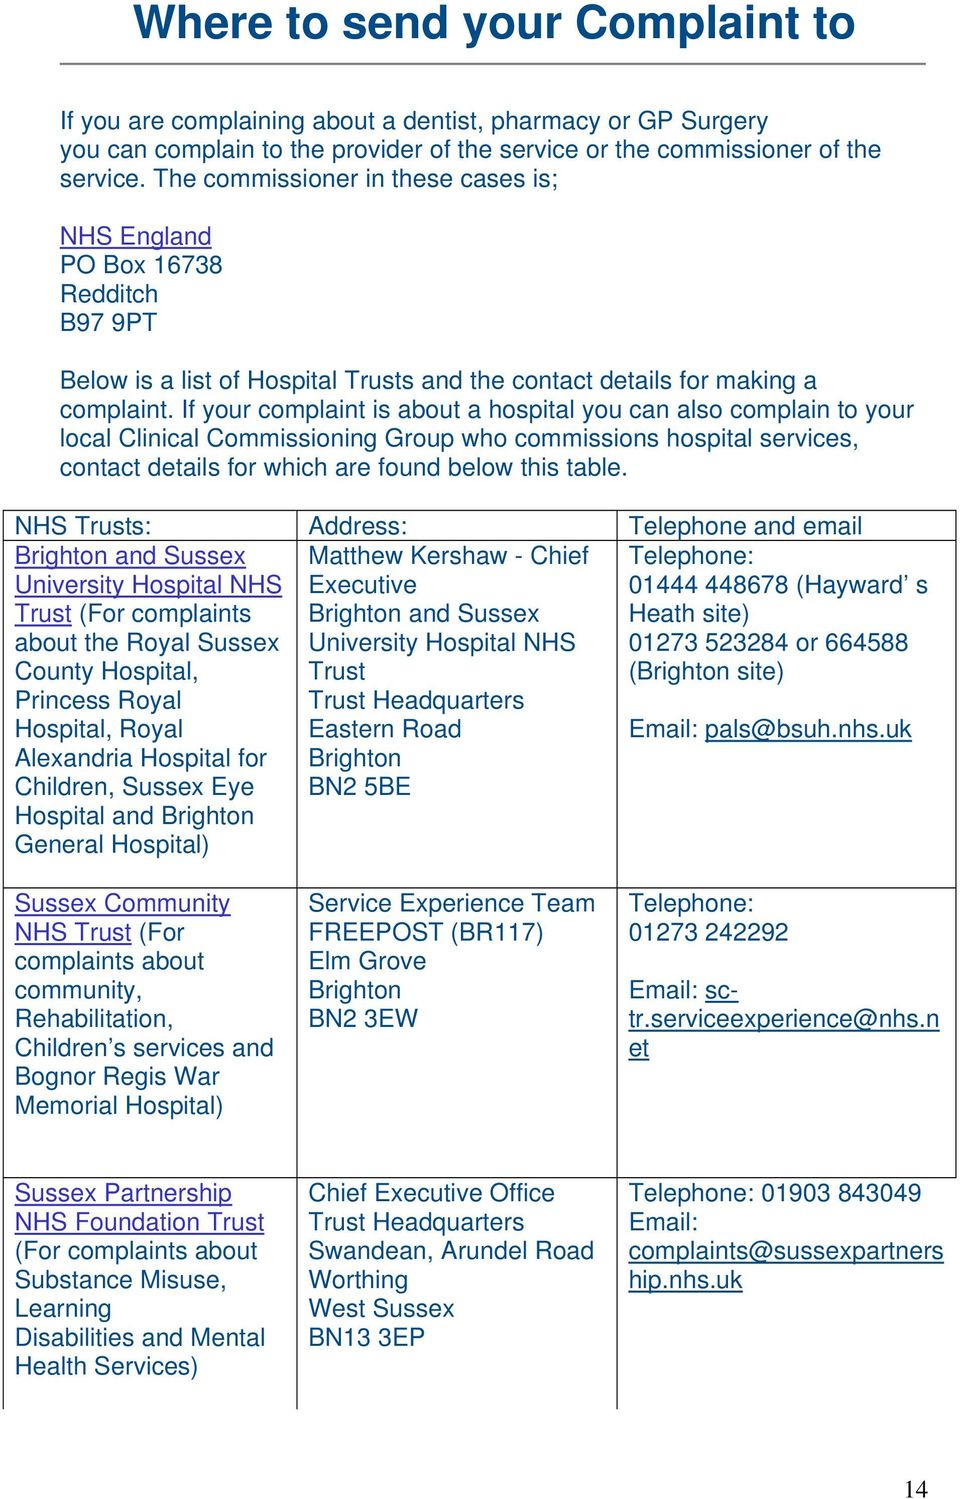 If your complaint is about a hospital you can also complain to your local Clinical Commissioning Group who commissions hospital services, contact details for which are found below this table.